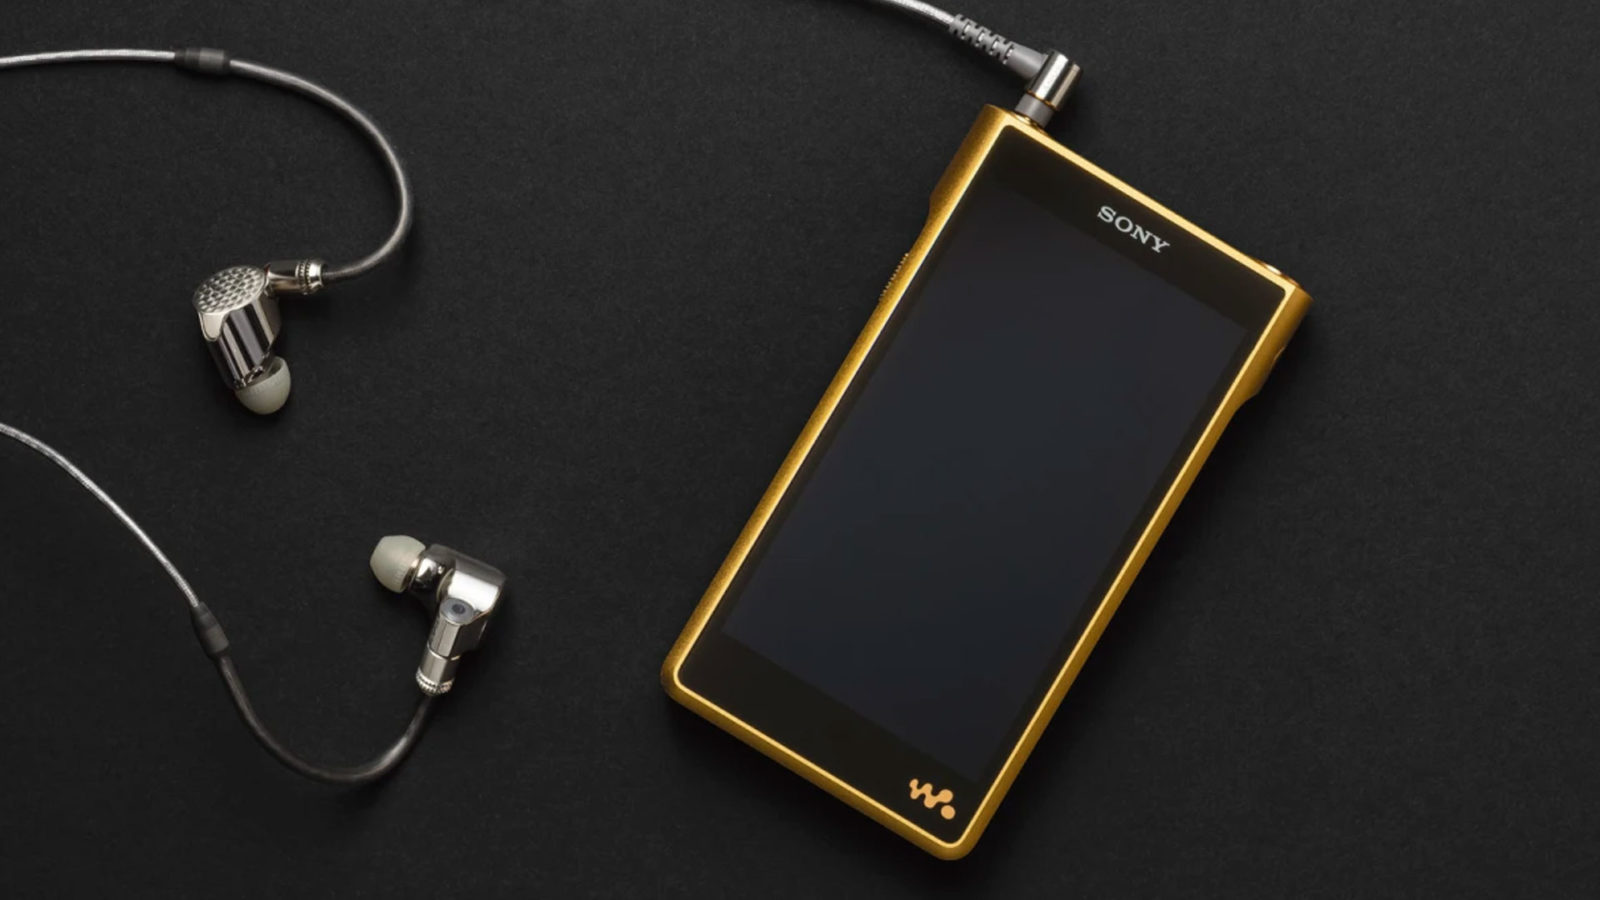 Sony gives the Walkman a second life with new gadgets